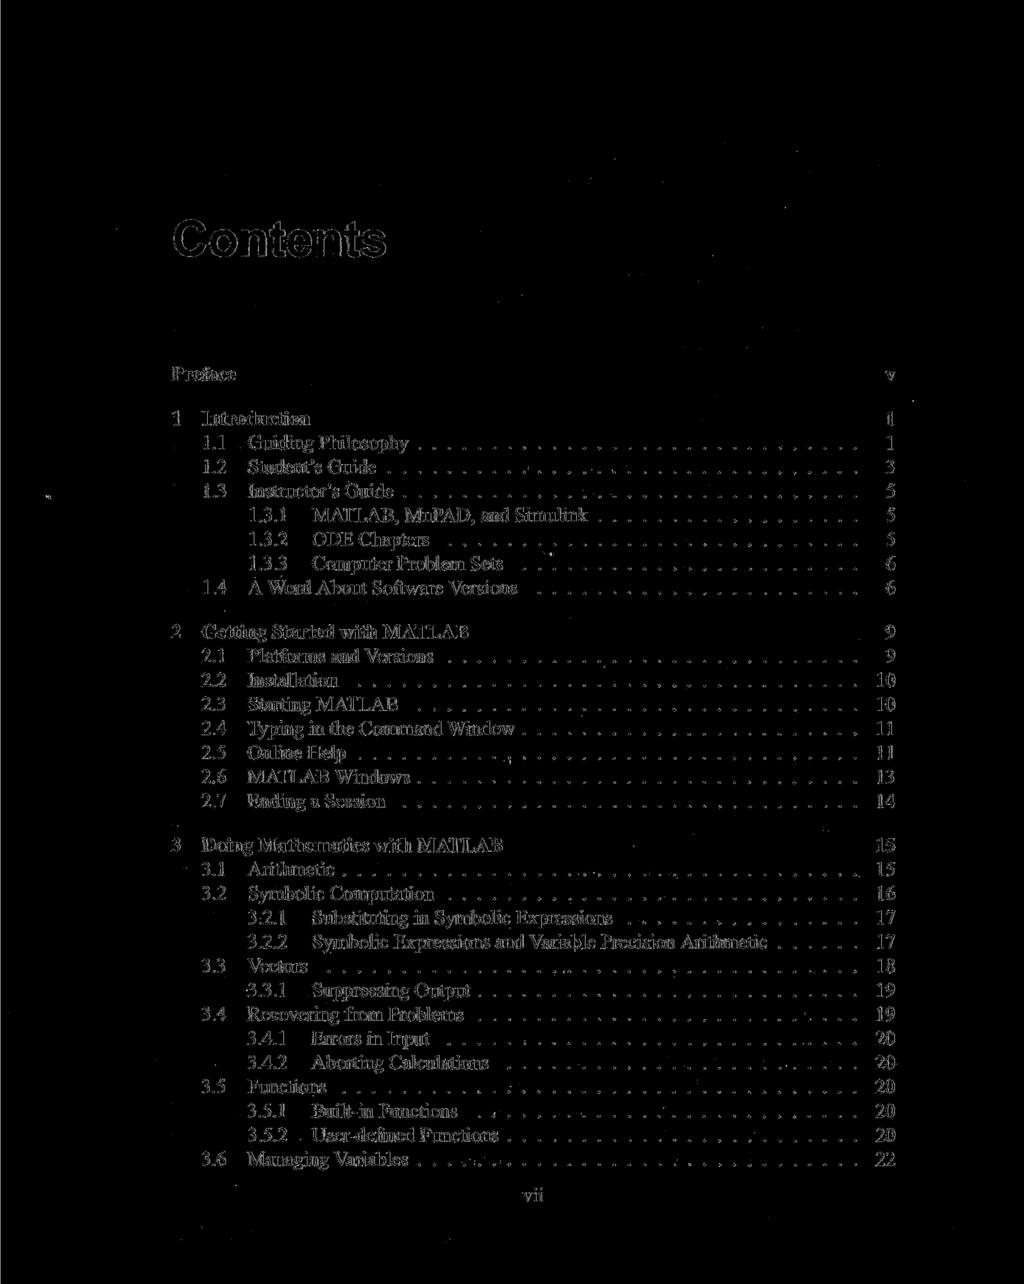 Contents Preface v 1 Introduction 1 1.1 Guiding Philosophy 1 1.2 Student's Guide 3 1.3 Instructor's Guide 5 1.3.1 MATLAB, MuPAD, and Simulink 5 1.3.2 ODE Chapters 5 1.3.3 Computer Problem Sets 6 1.